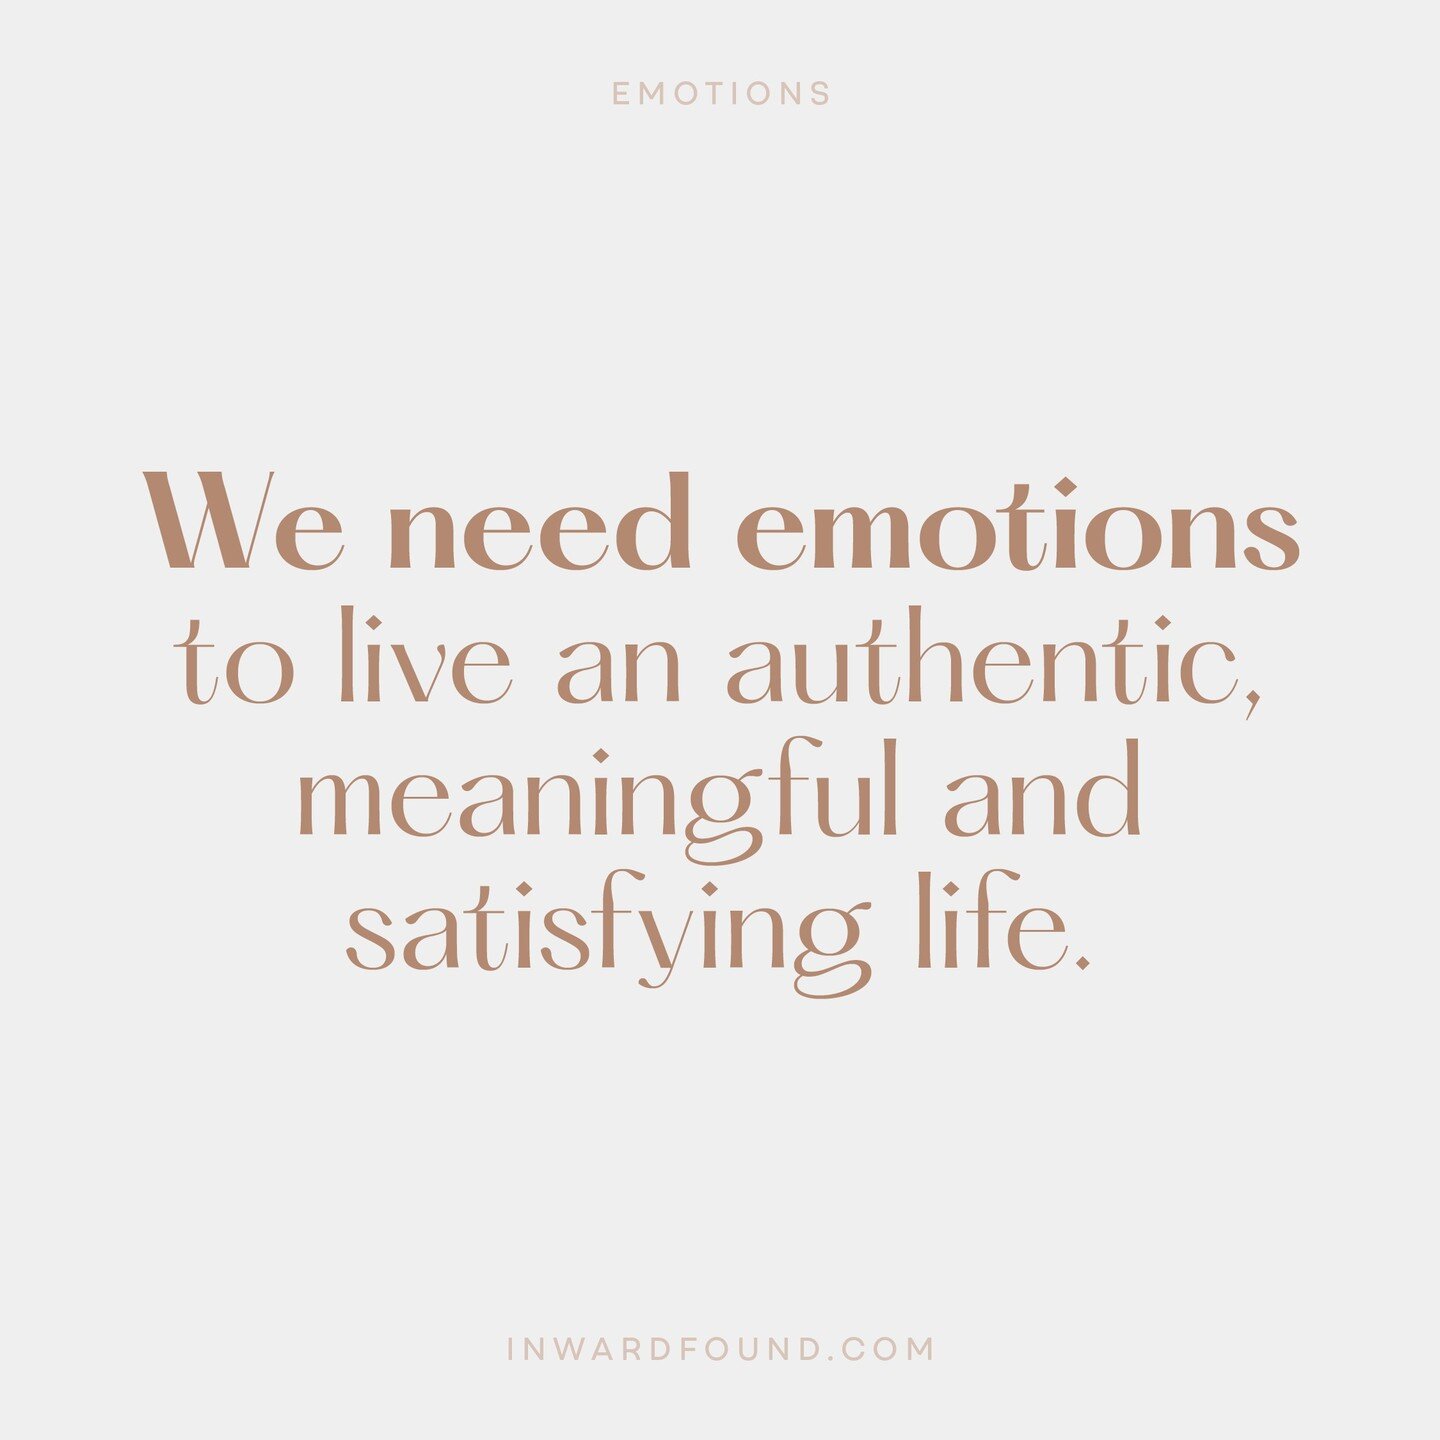 Living a fulfilling life that feels meaningful and authentic involves experiencing the full range of human emotions.

Read more about our Why emotions aren't our enemy in the Journal section (link in Bio).

#inwardfound #emotionsarenotyourenemy #unde